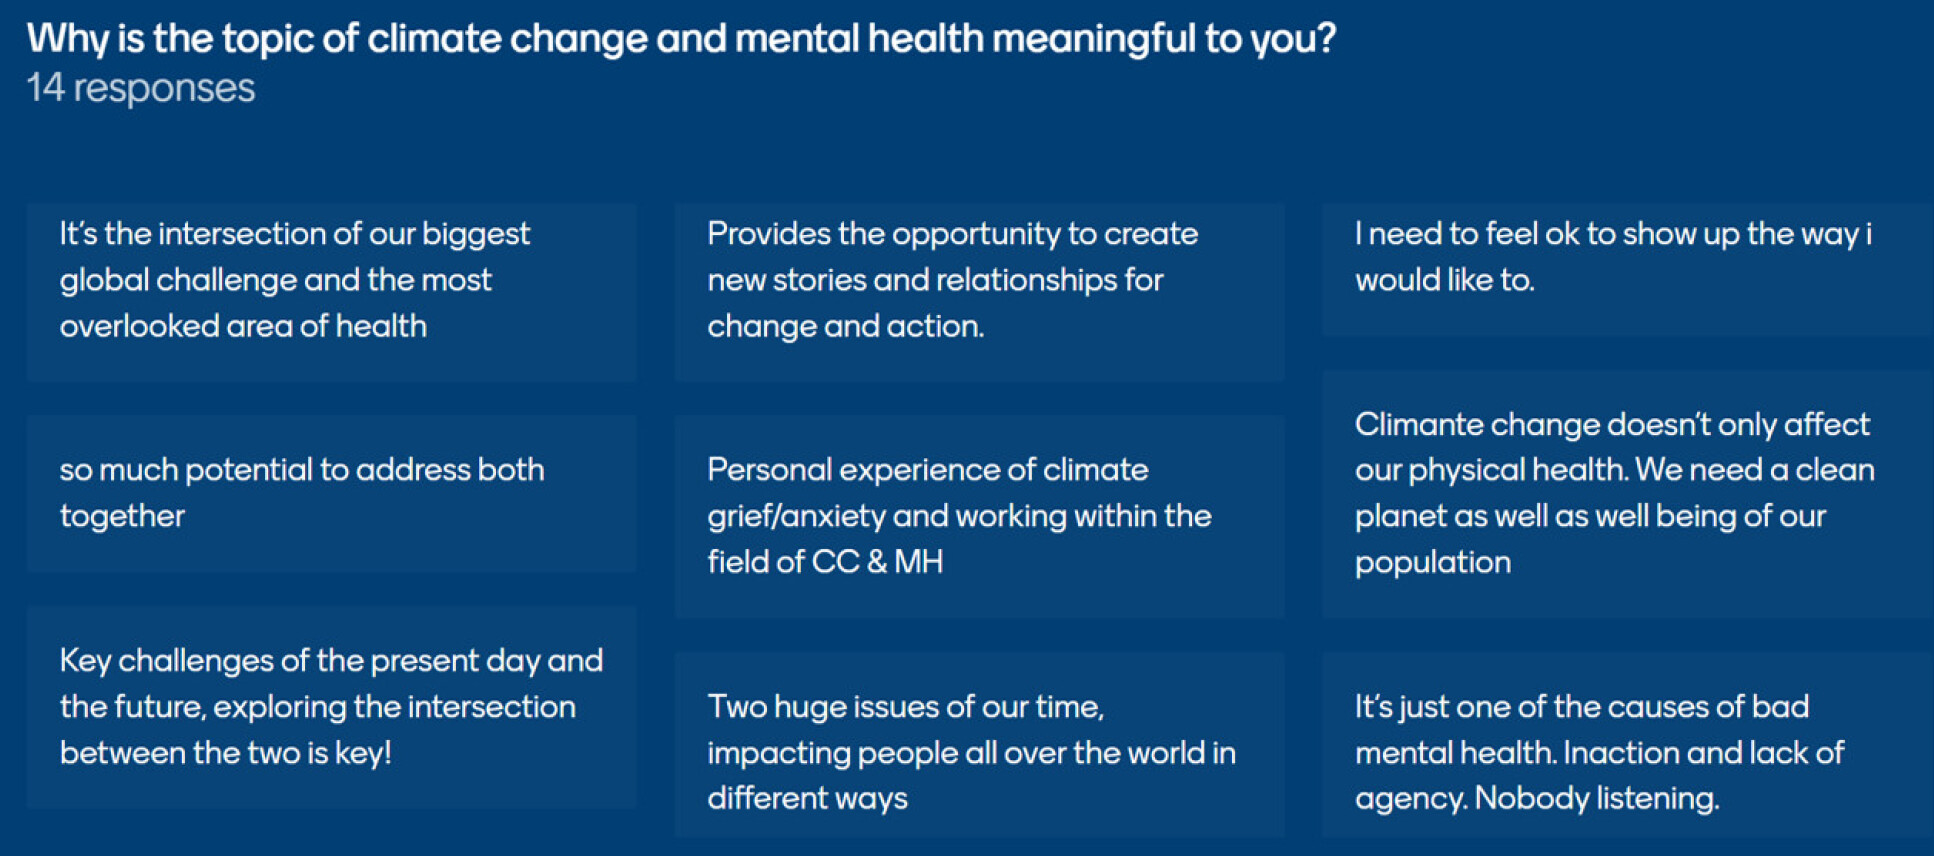 Text responses on a blue background, to the question "Why is the topic of climate change and mental health meaningful to you?"